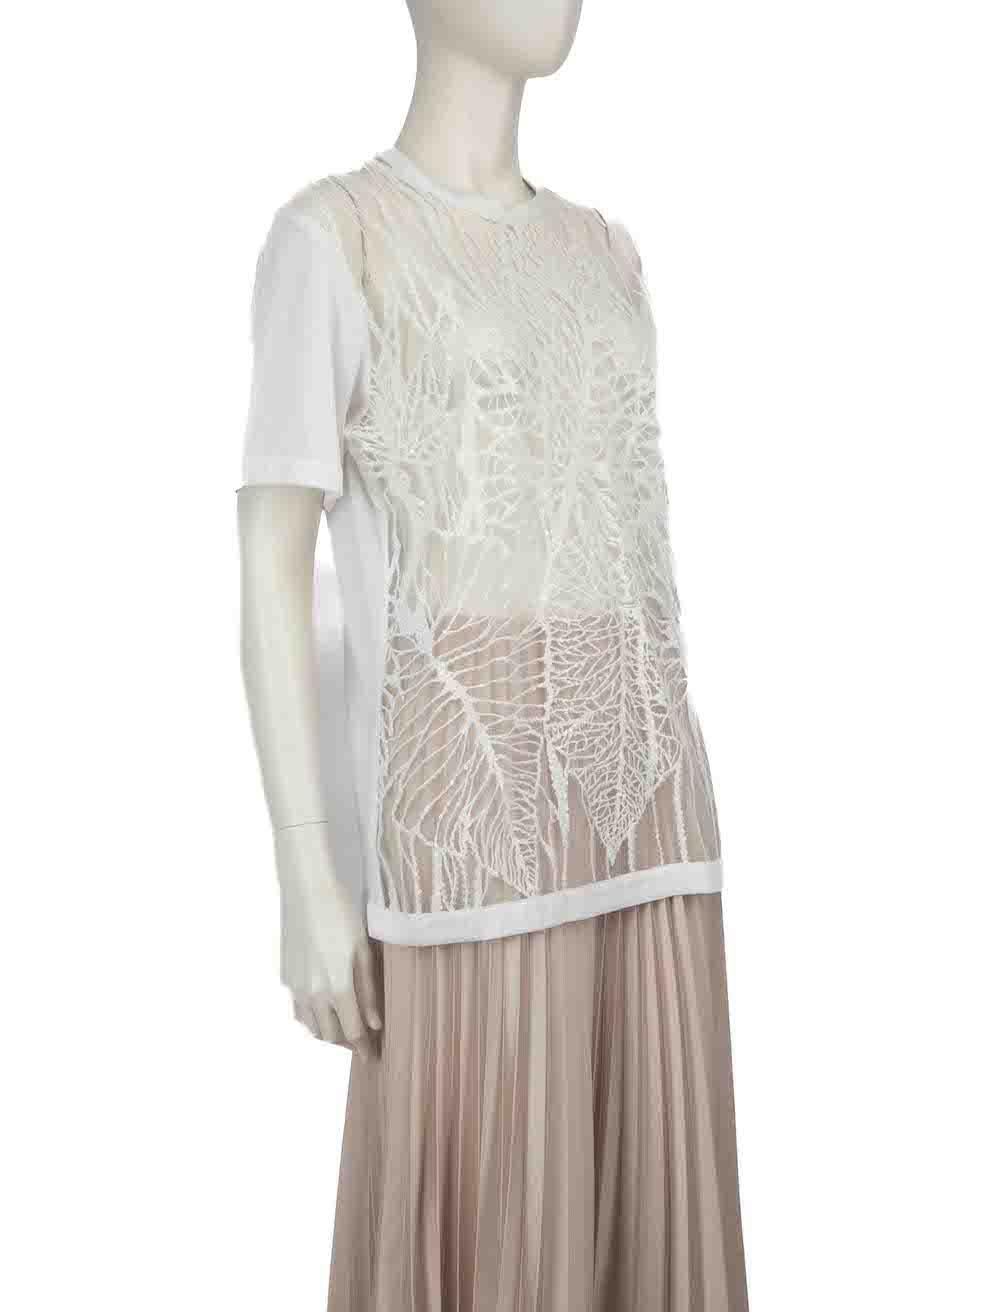 CONDITION is Very good. Hardly any visible wear to top is evident on this used Elie Saab designer resale item.
 
 
 
 Details
 
 
 White
 
 Cotton
 
 T-Shirt
 
 Sheer sequin embellished front
 
 Round neck
 
 
 
 
 
 Made in Lebanon
 
 
 
